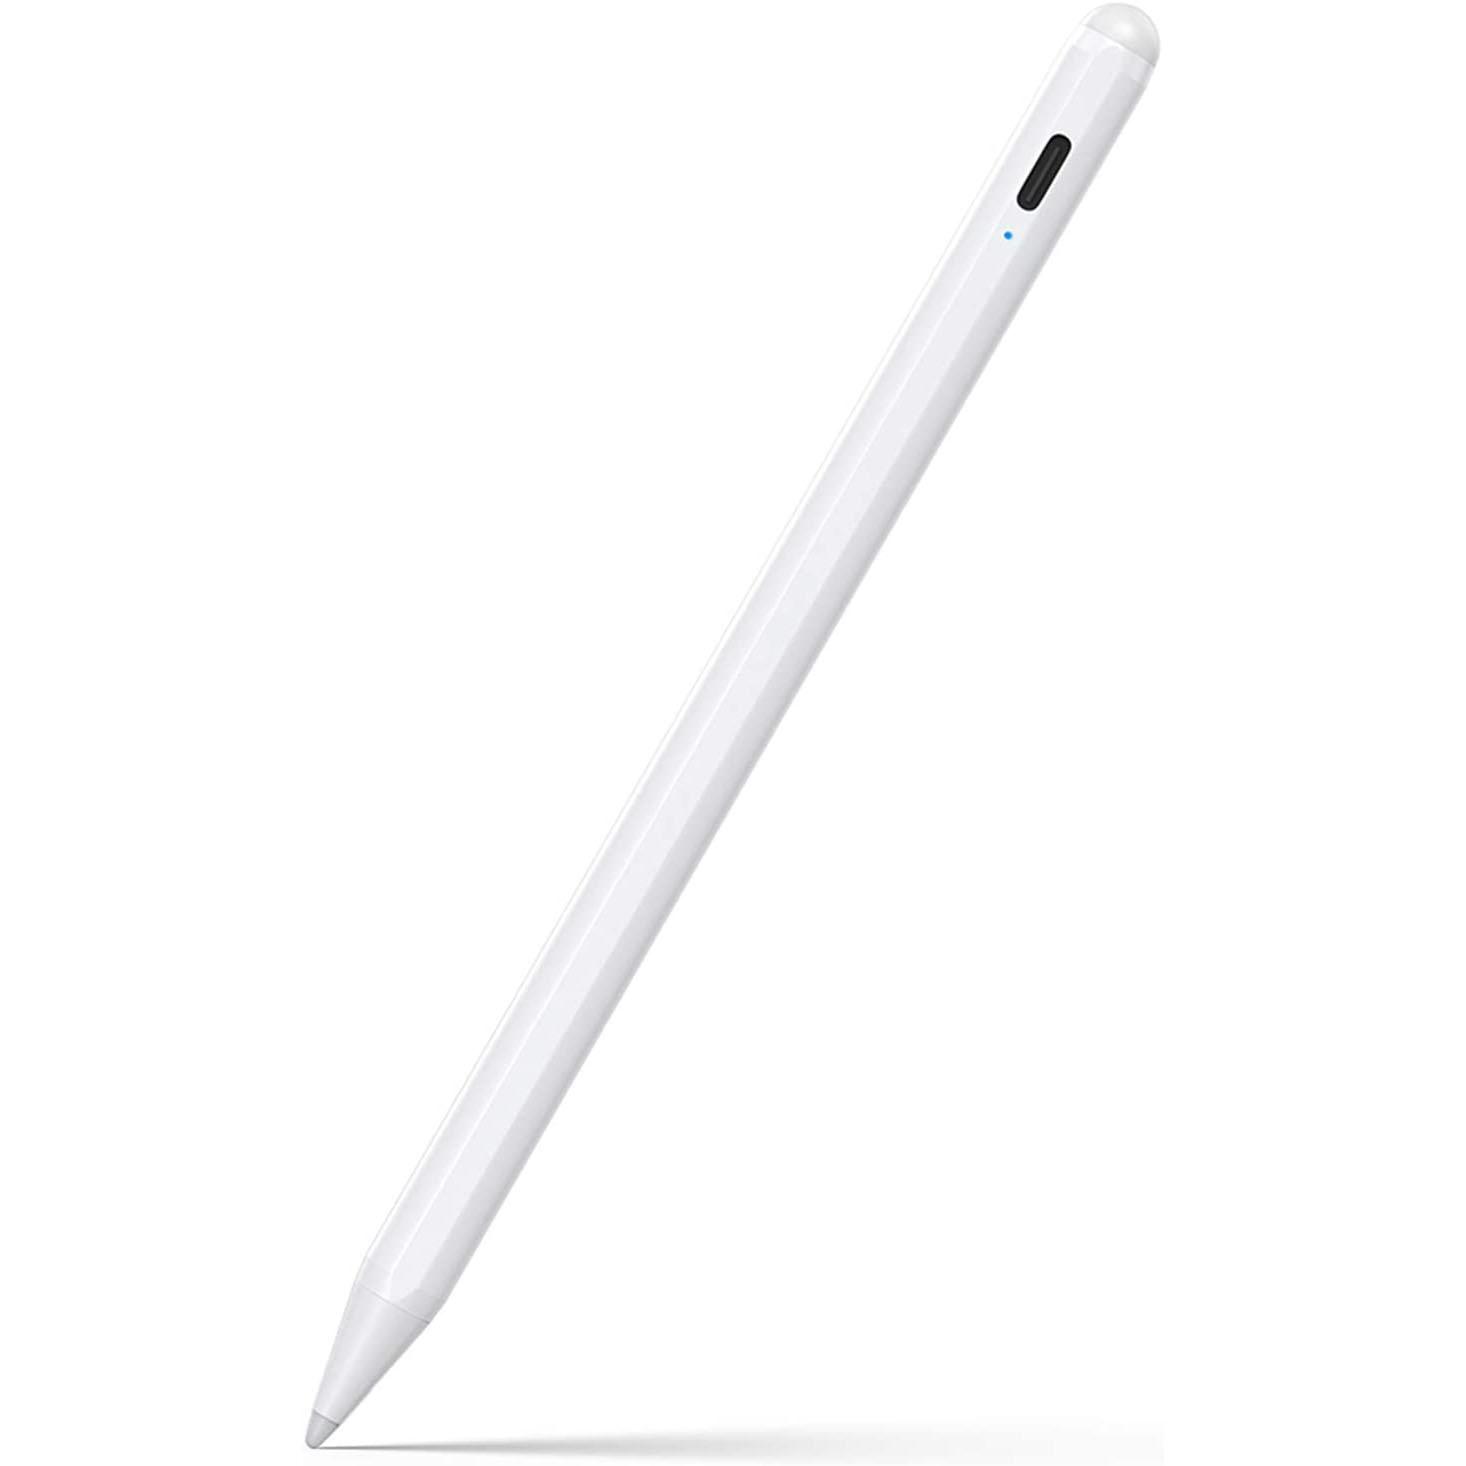 Stylus Pen for iPad with Palm Rejection for $23.79